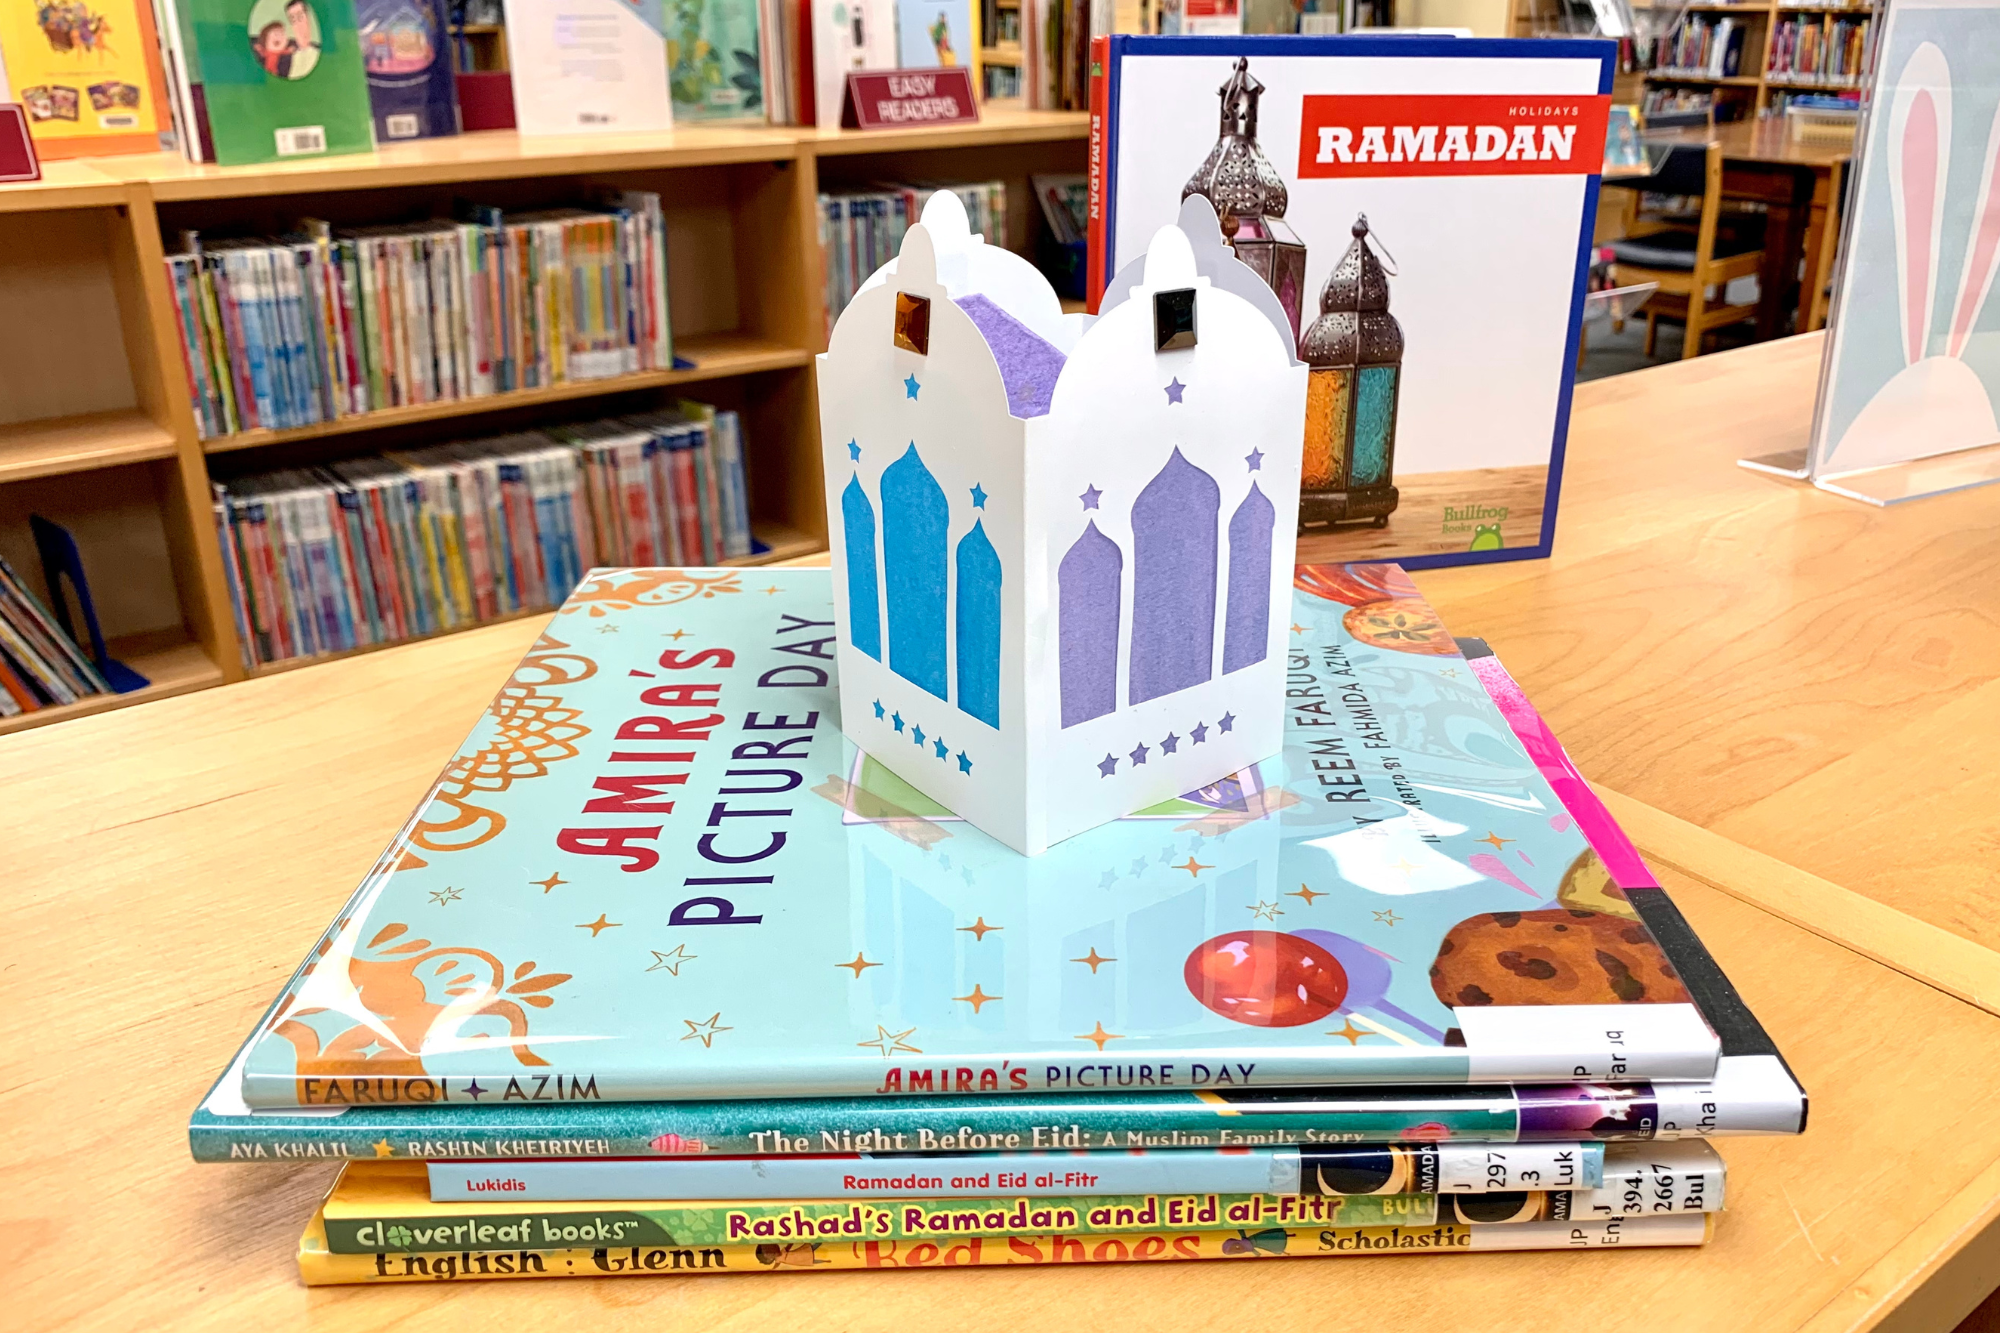 A paper lantern craft rests on top of a small stack of children's Ramadan picture books.